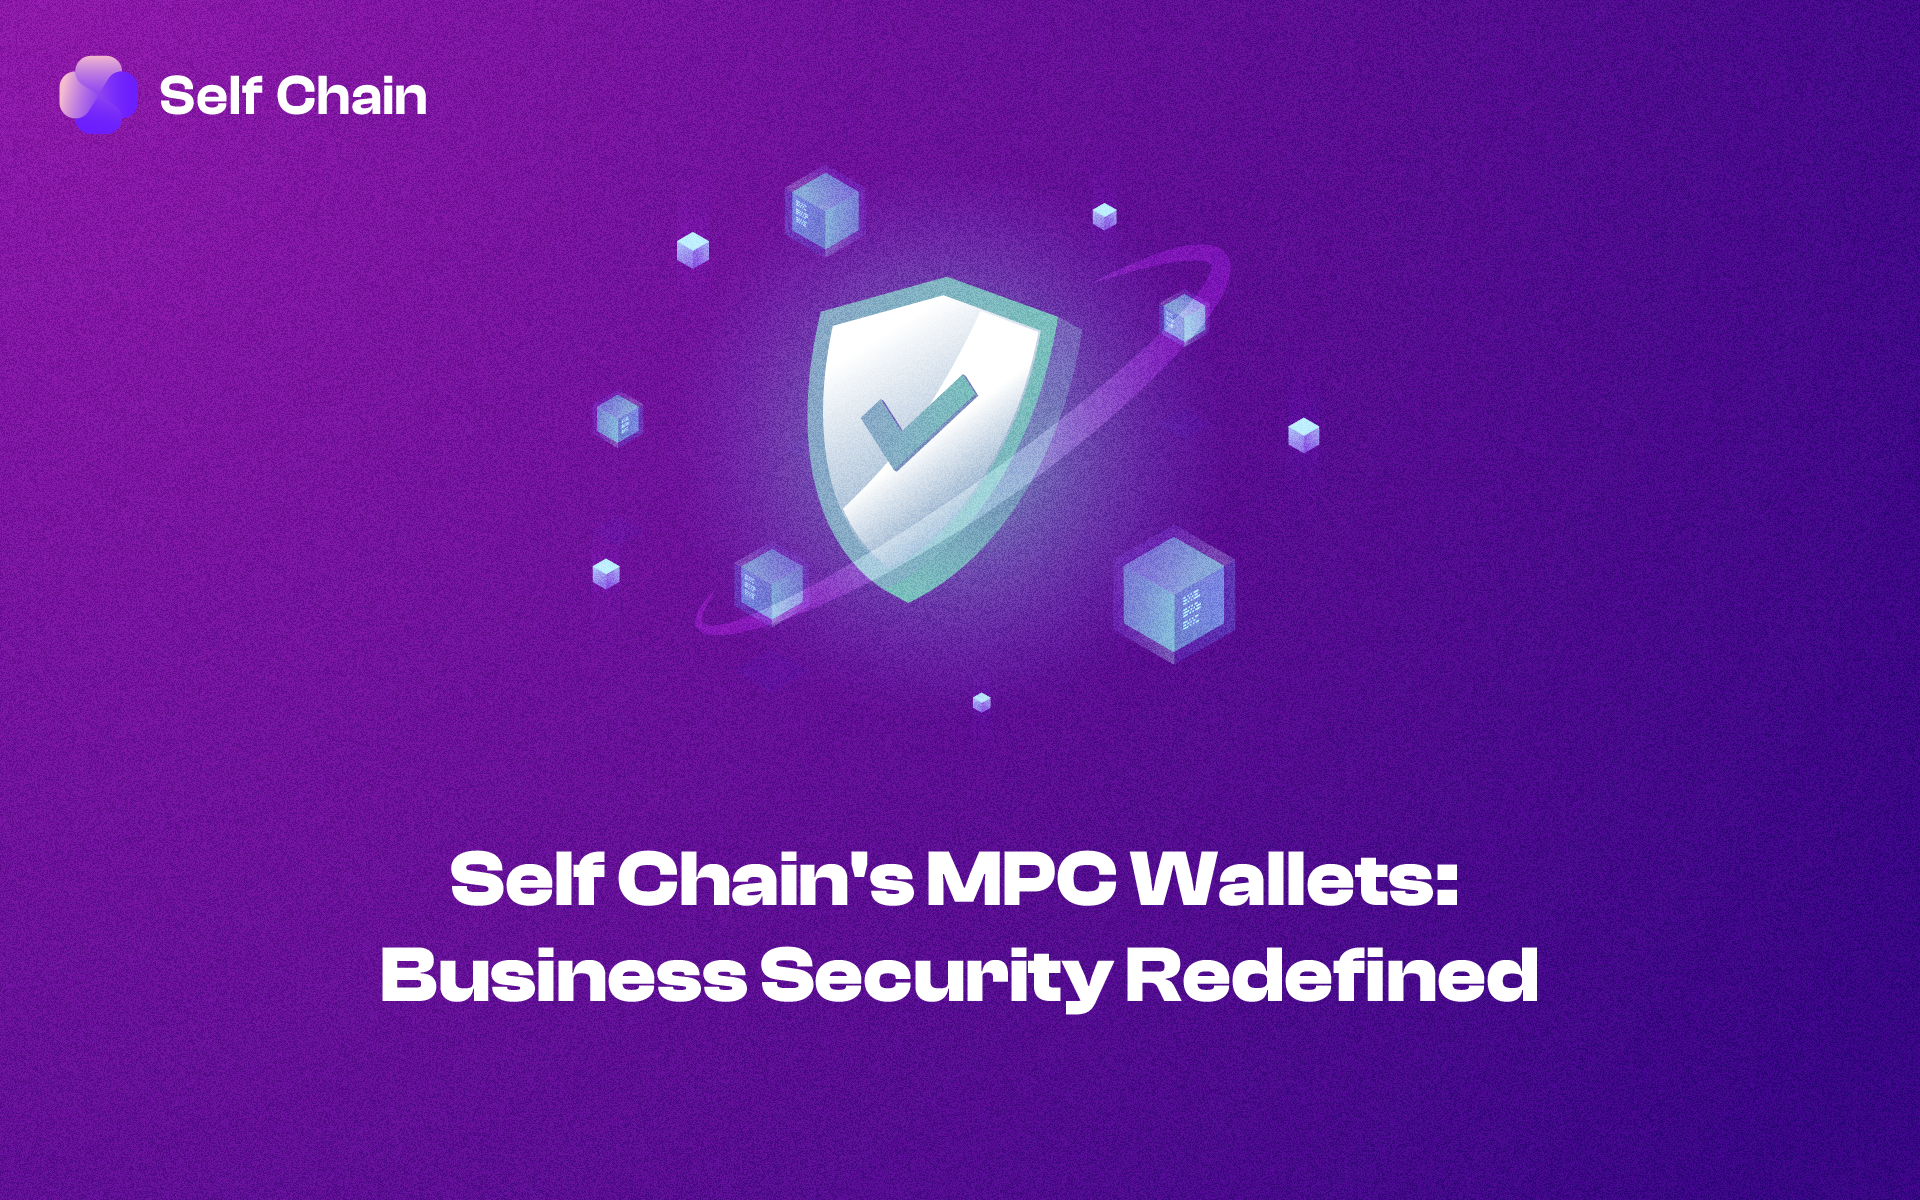 Self Chain's MPC Wallets: Business Security Redefined